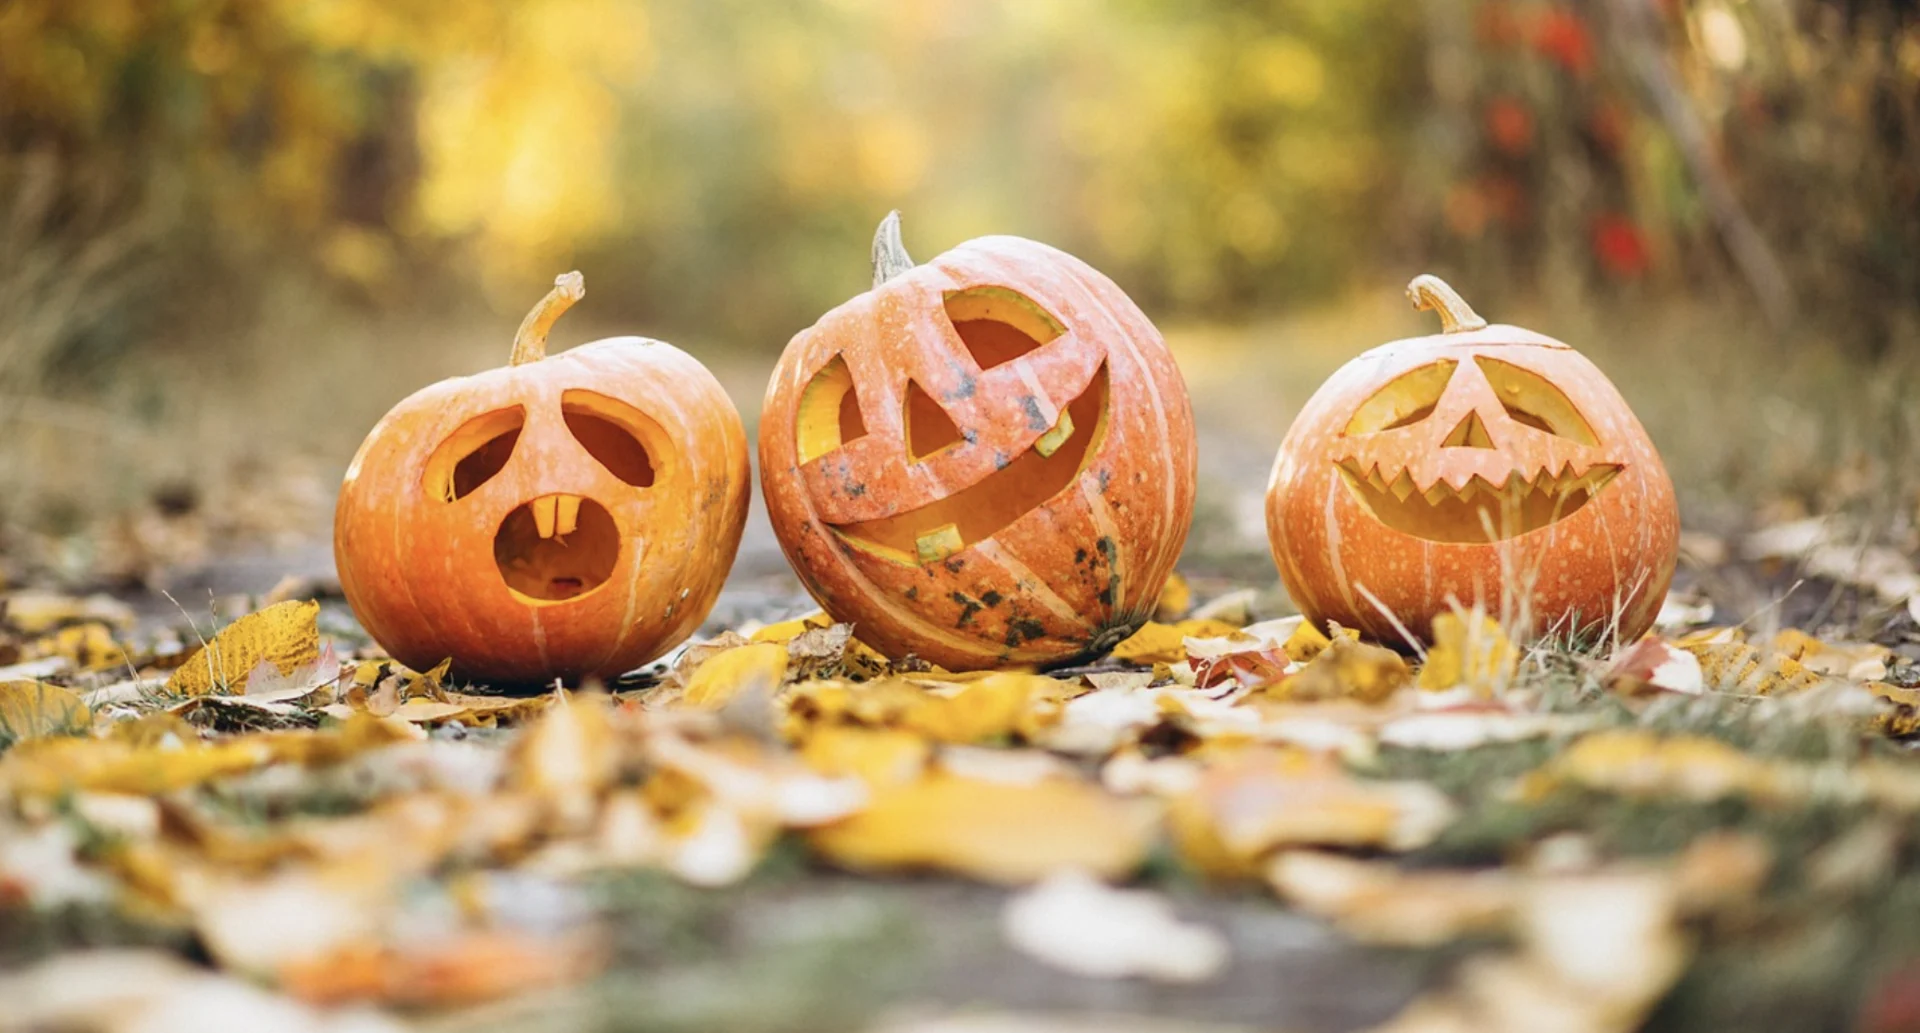 5 things to do with your pumpkins after Halloween